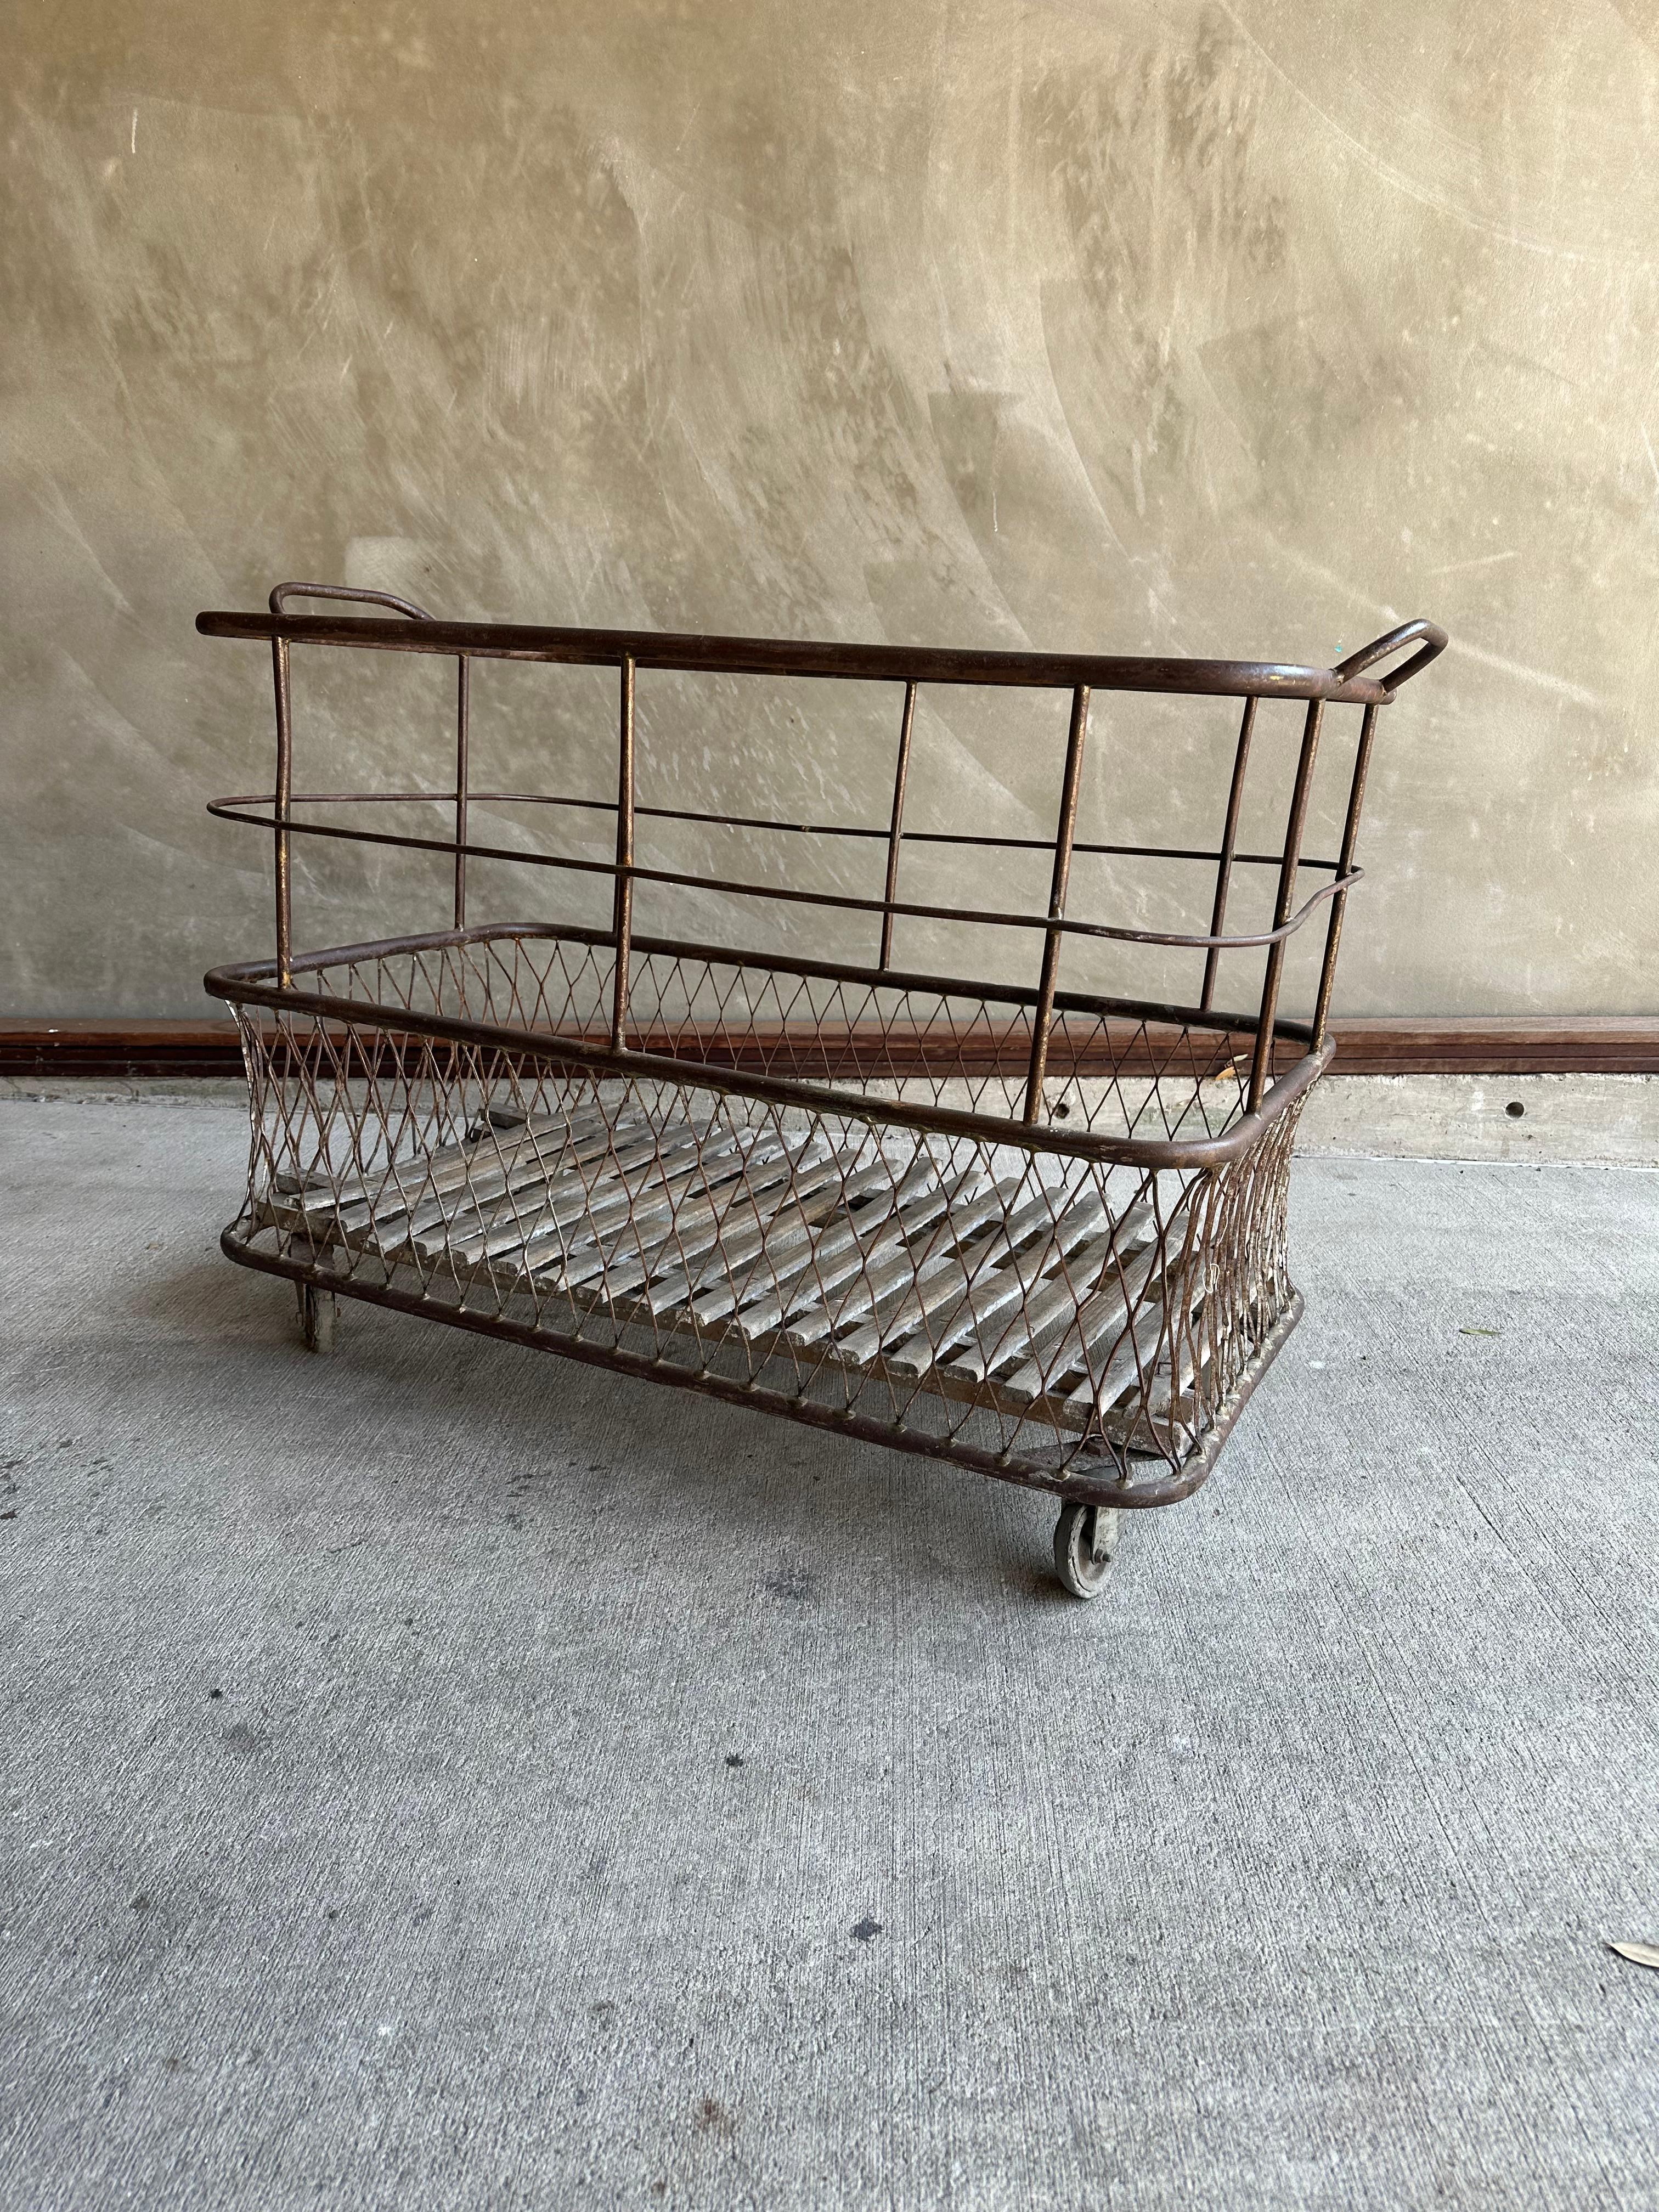 A French metal cart, basket, trolley with slatted wood at base, wheels, and basket weave sides. Understood to originally have been a cart for delivering French bread to market. France, late 19th century.